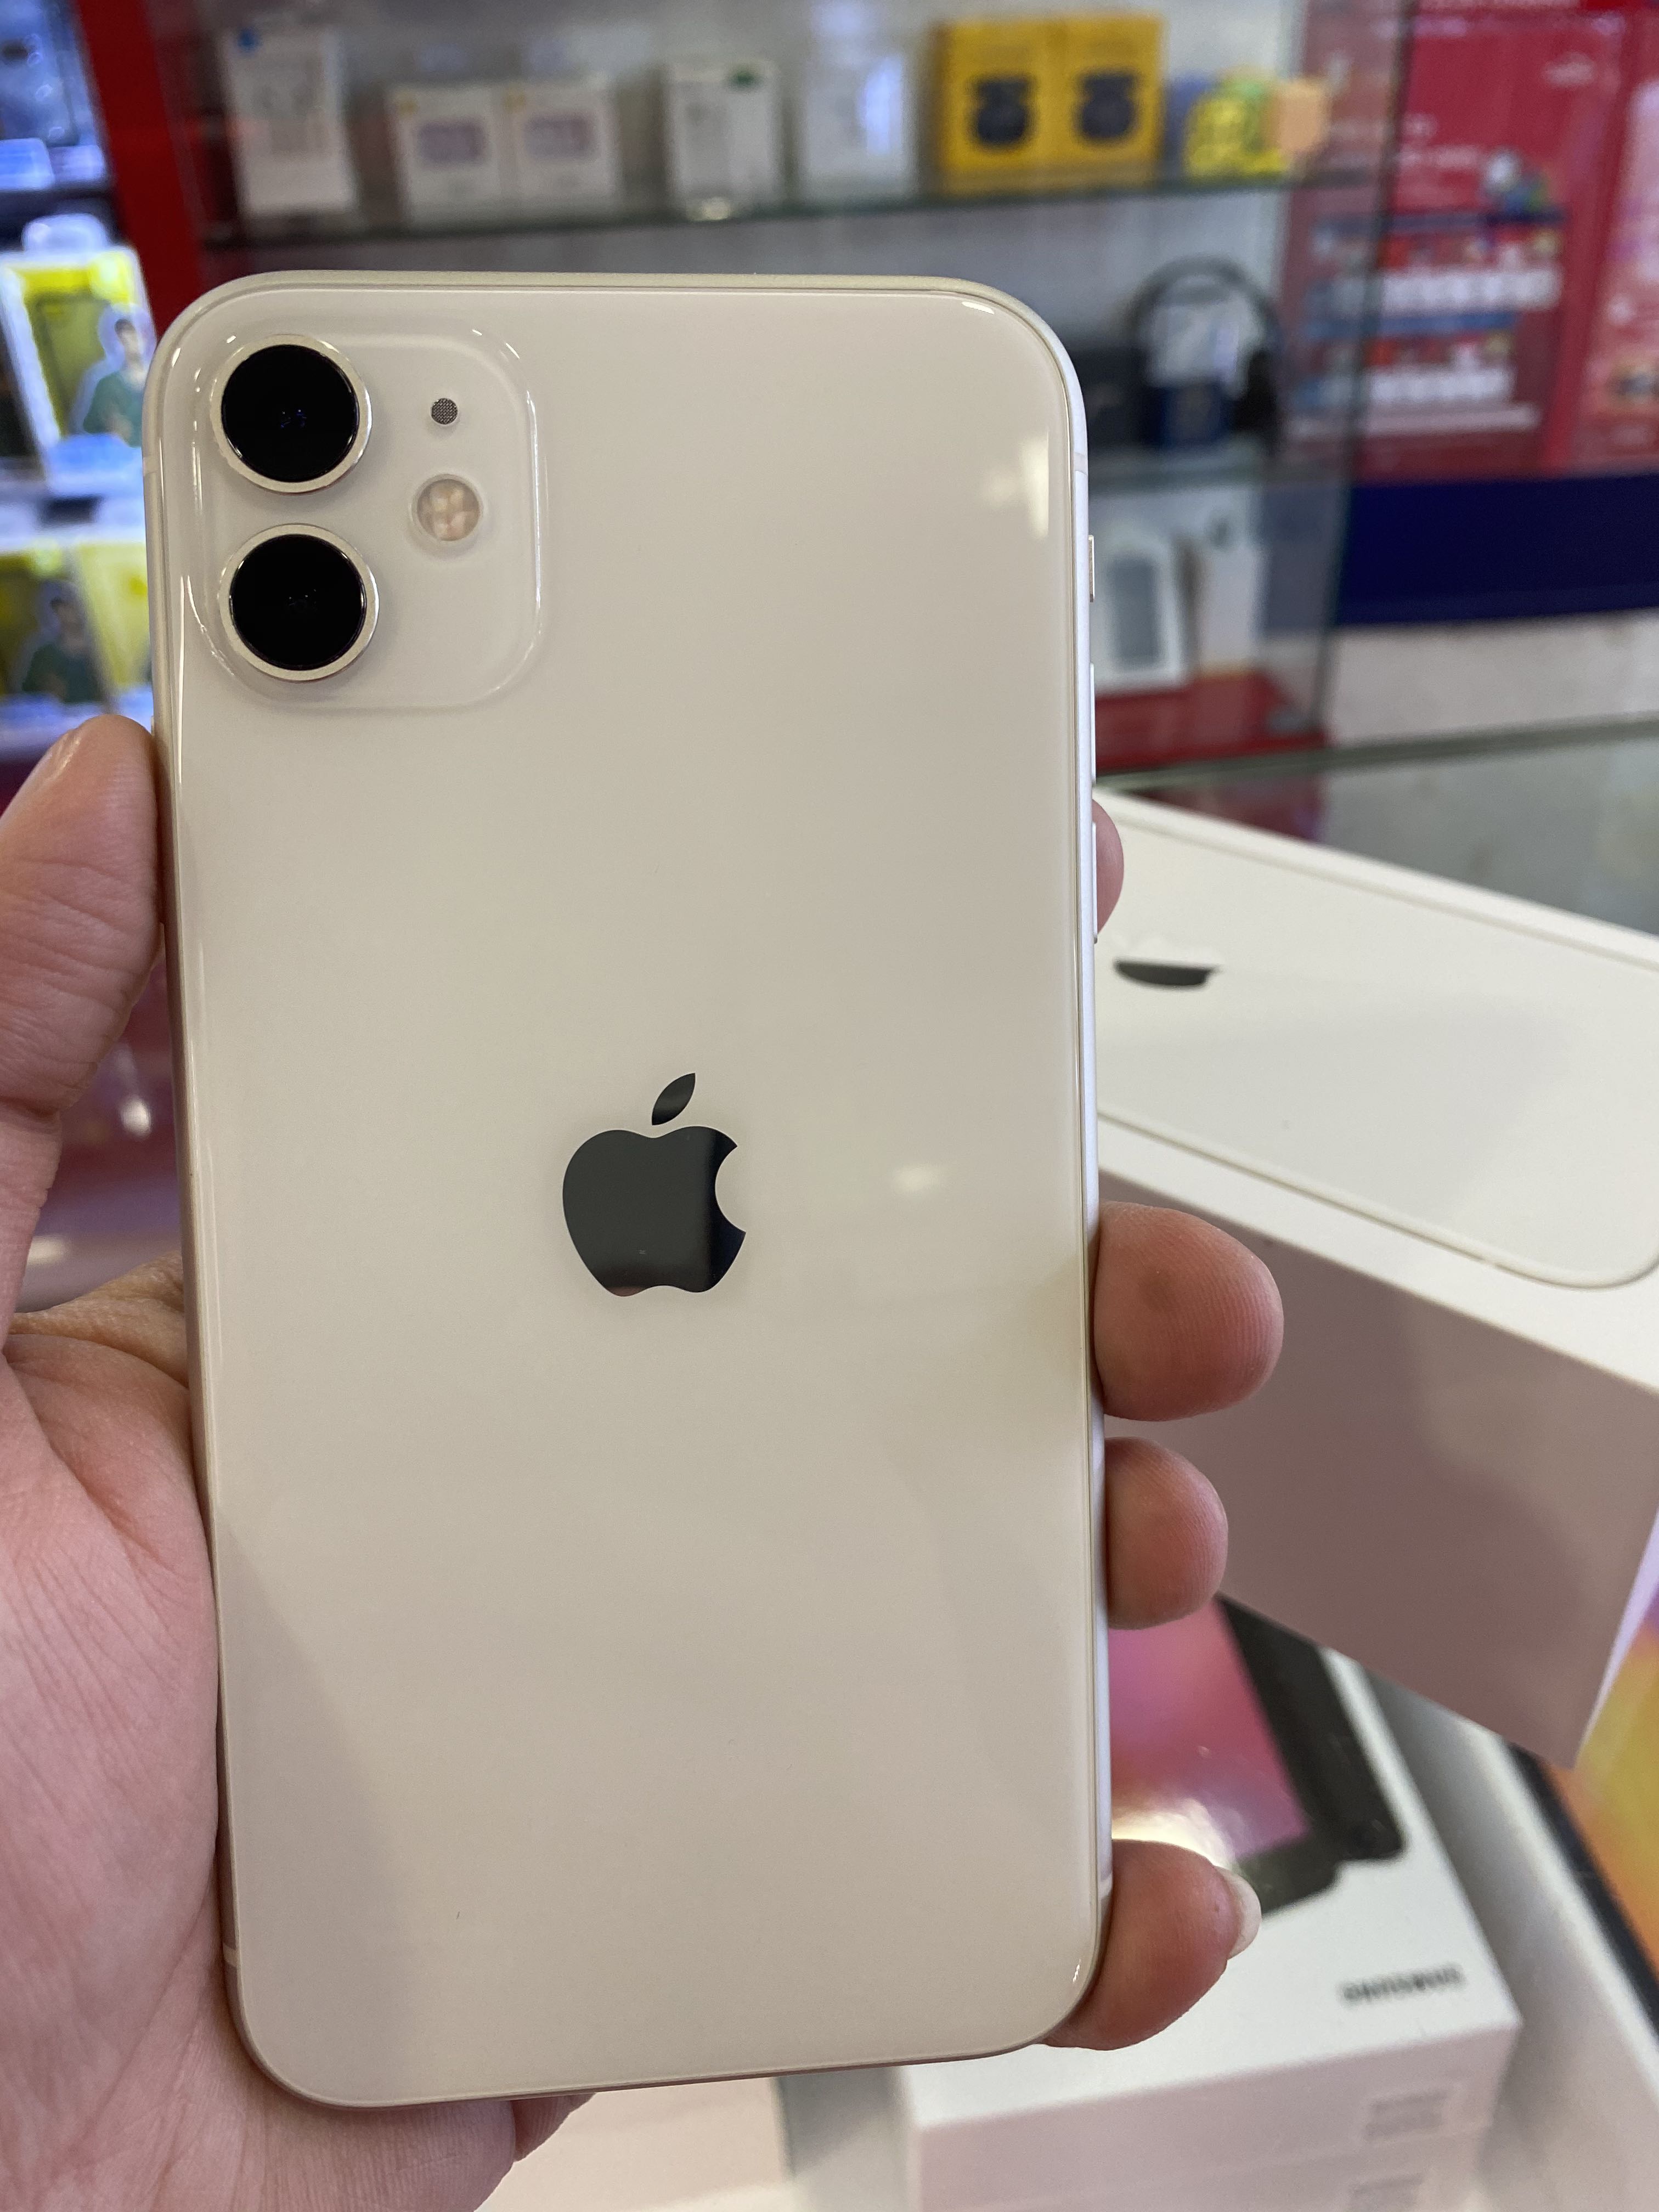 Iphone 11 128gb White Used Mobile Phones Gadgets Mobile Phones Iphone Iphone 11 Series On Carousell